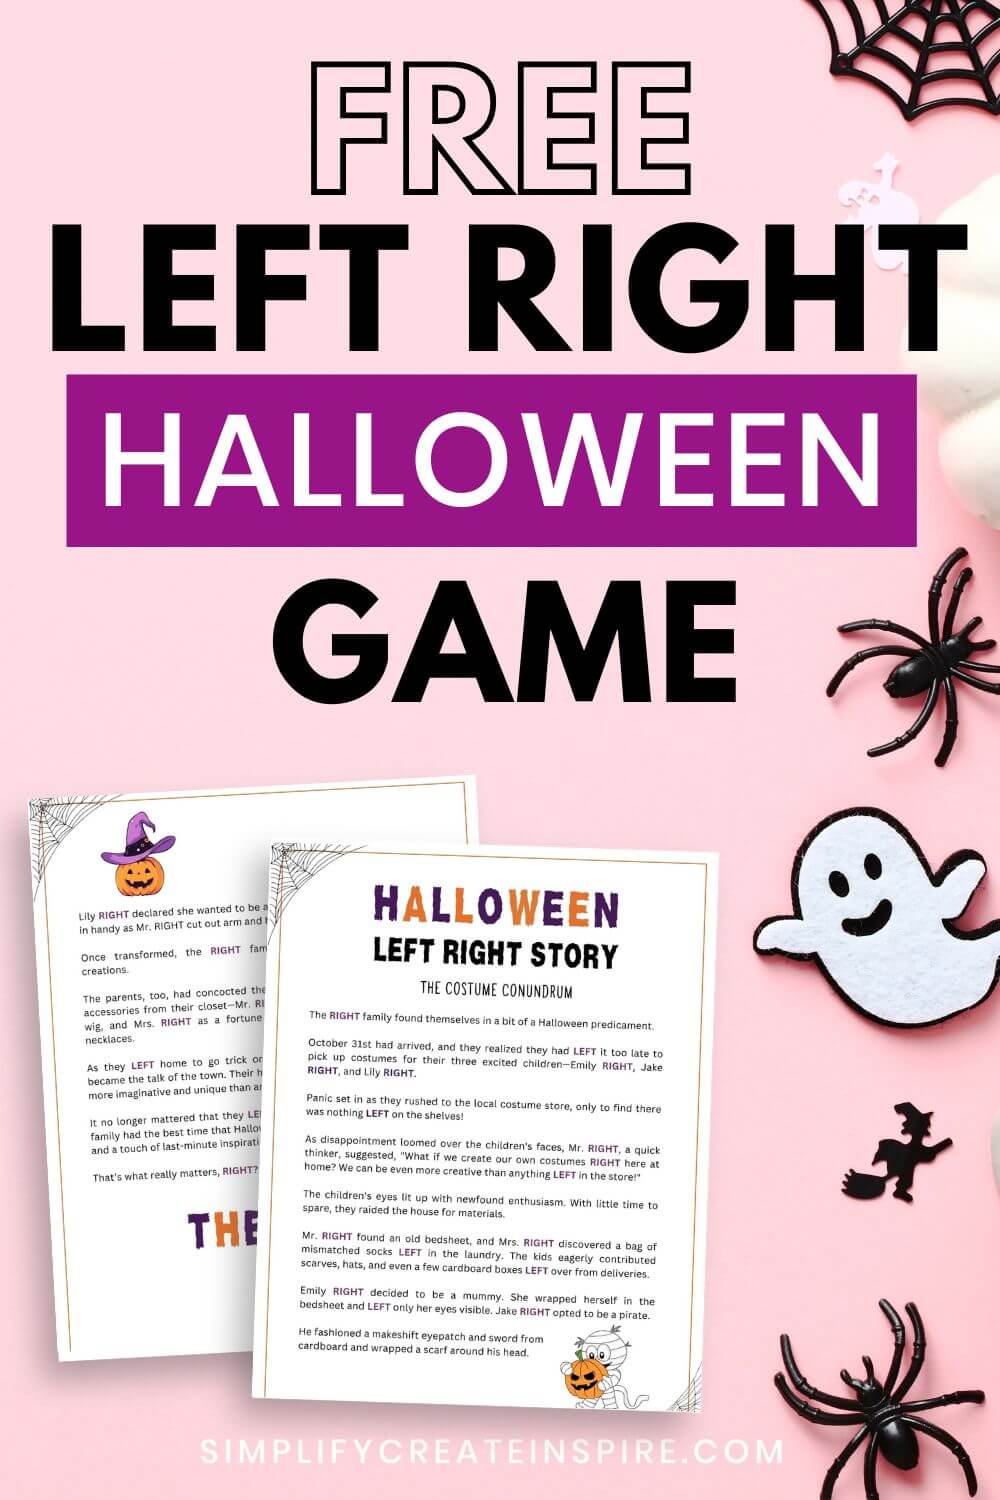 Free left right halloween game printable on pink background.